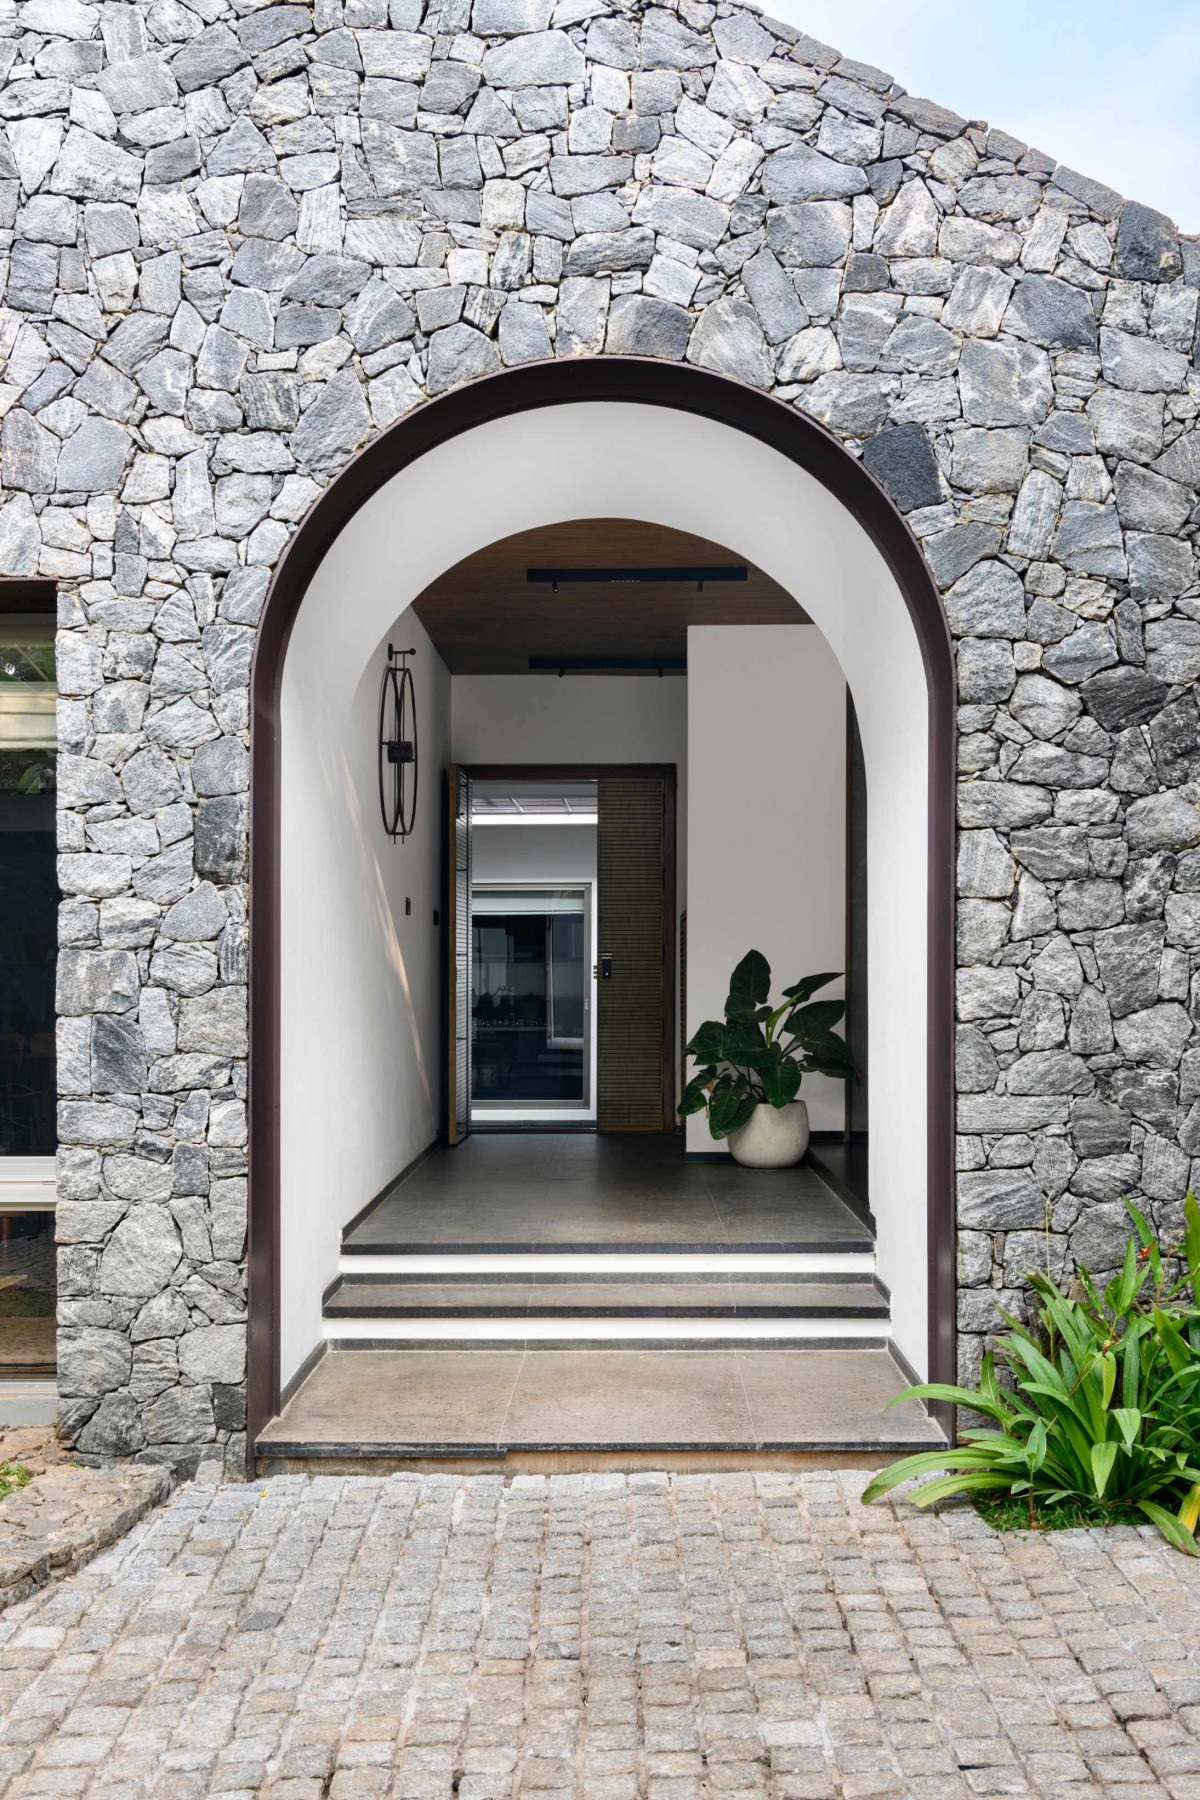 Entrance of The Hidden House by Aslam Sham Architects